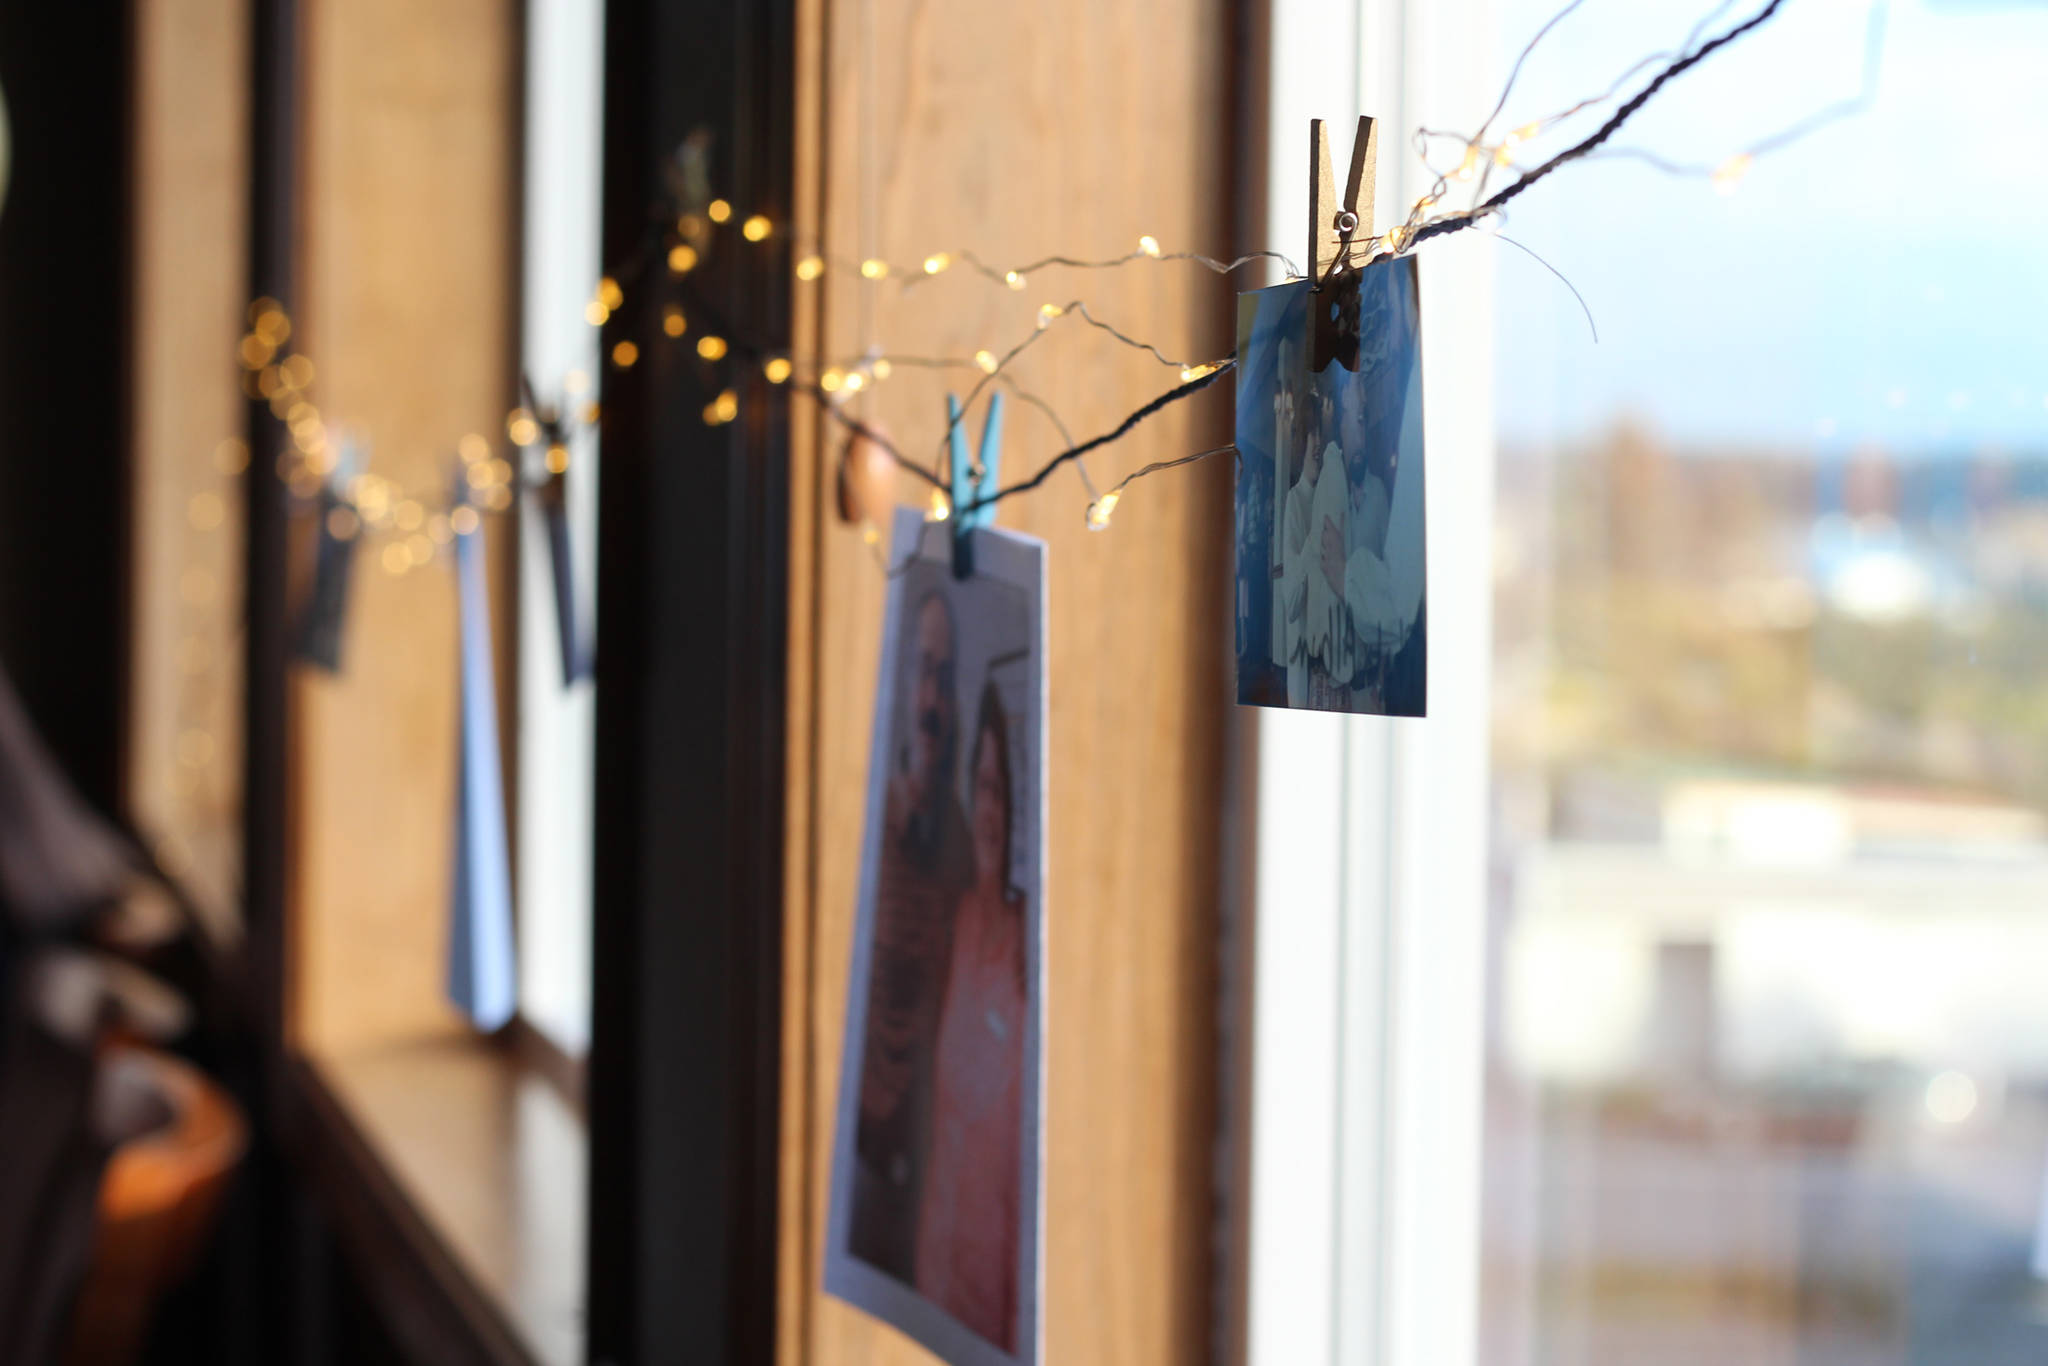 Photos and notes of thanks about Mary Lou Kelsey, a longtime certified nurse midwife in Himer, decorate the windows during a retirement party for her Friday, Oct. 13, 2017 at the Best Western in Homer, Alaska. (Photo by Megan Pacer/Homer News)